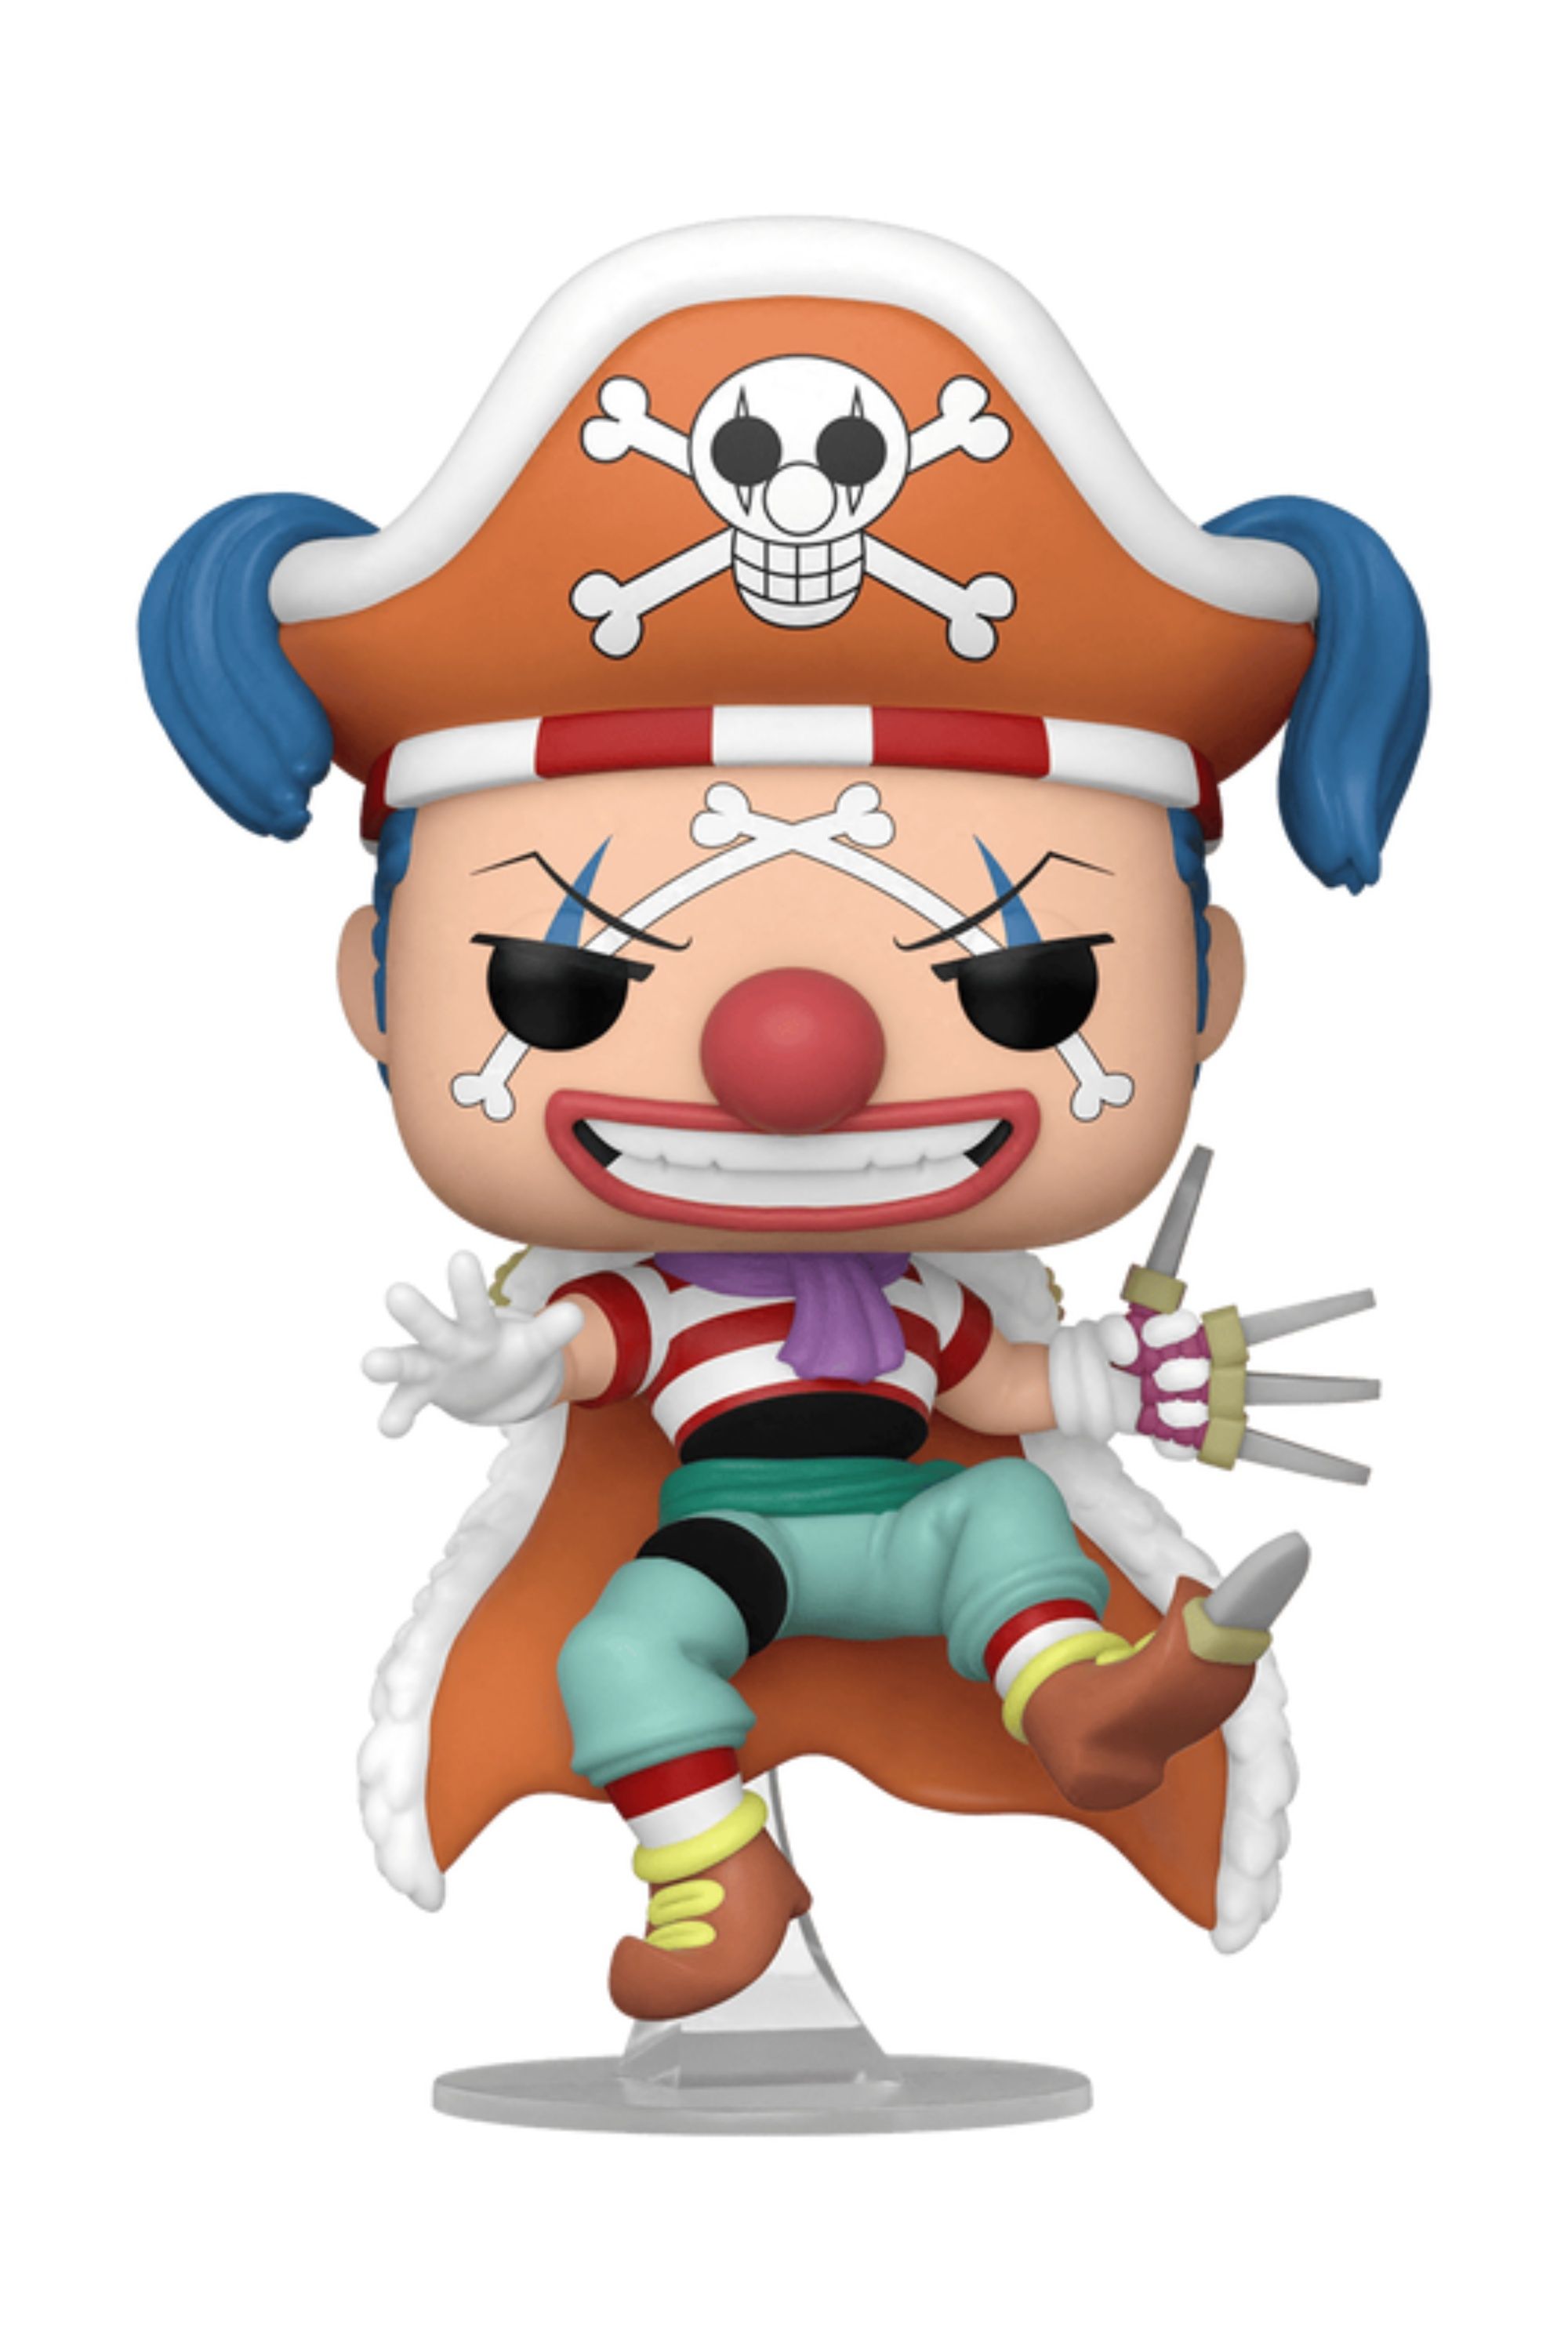 buggy the clown from one piece as a funko pop